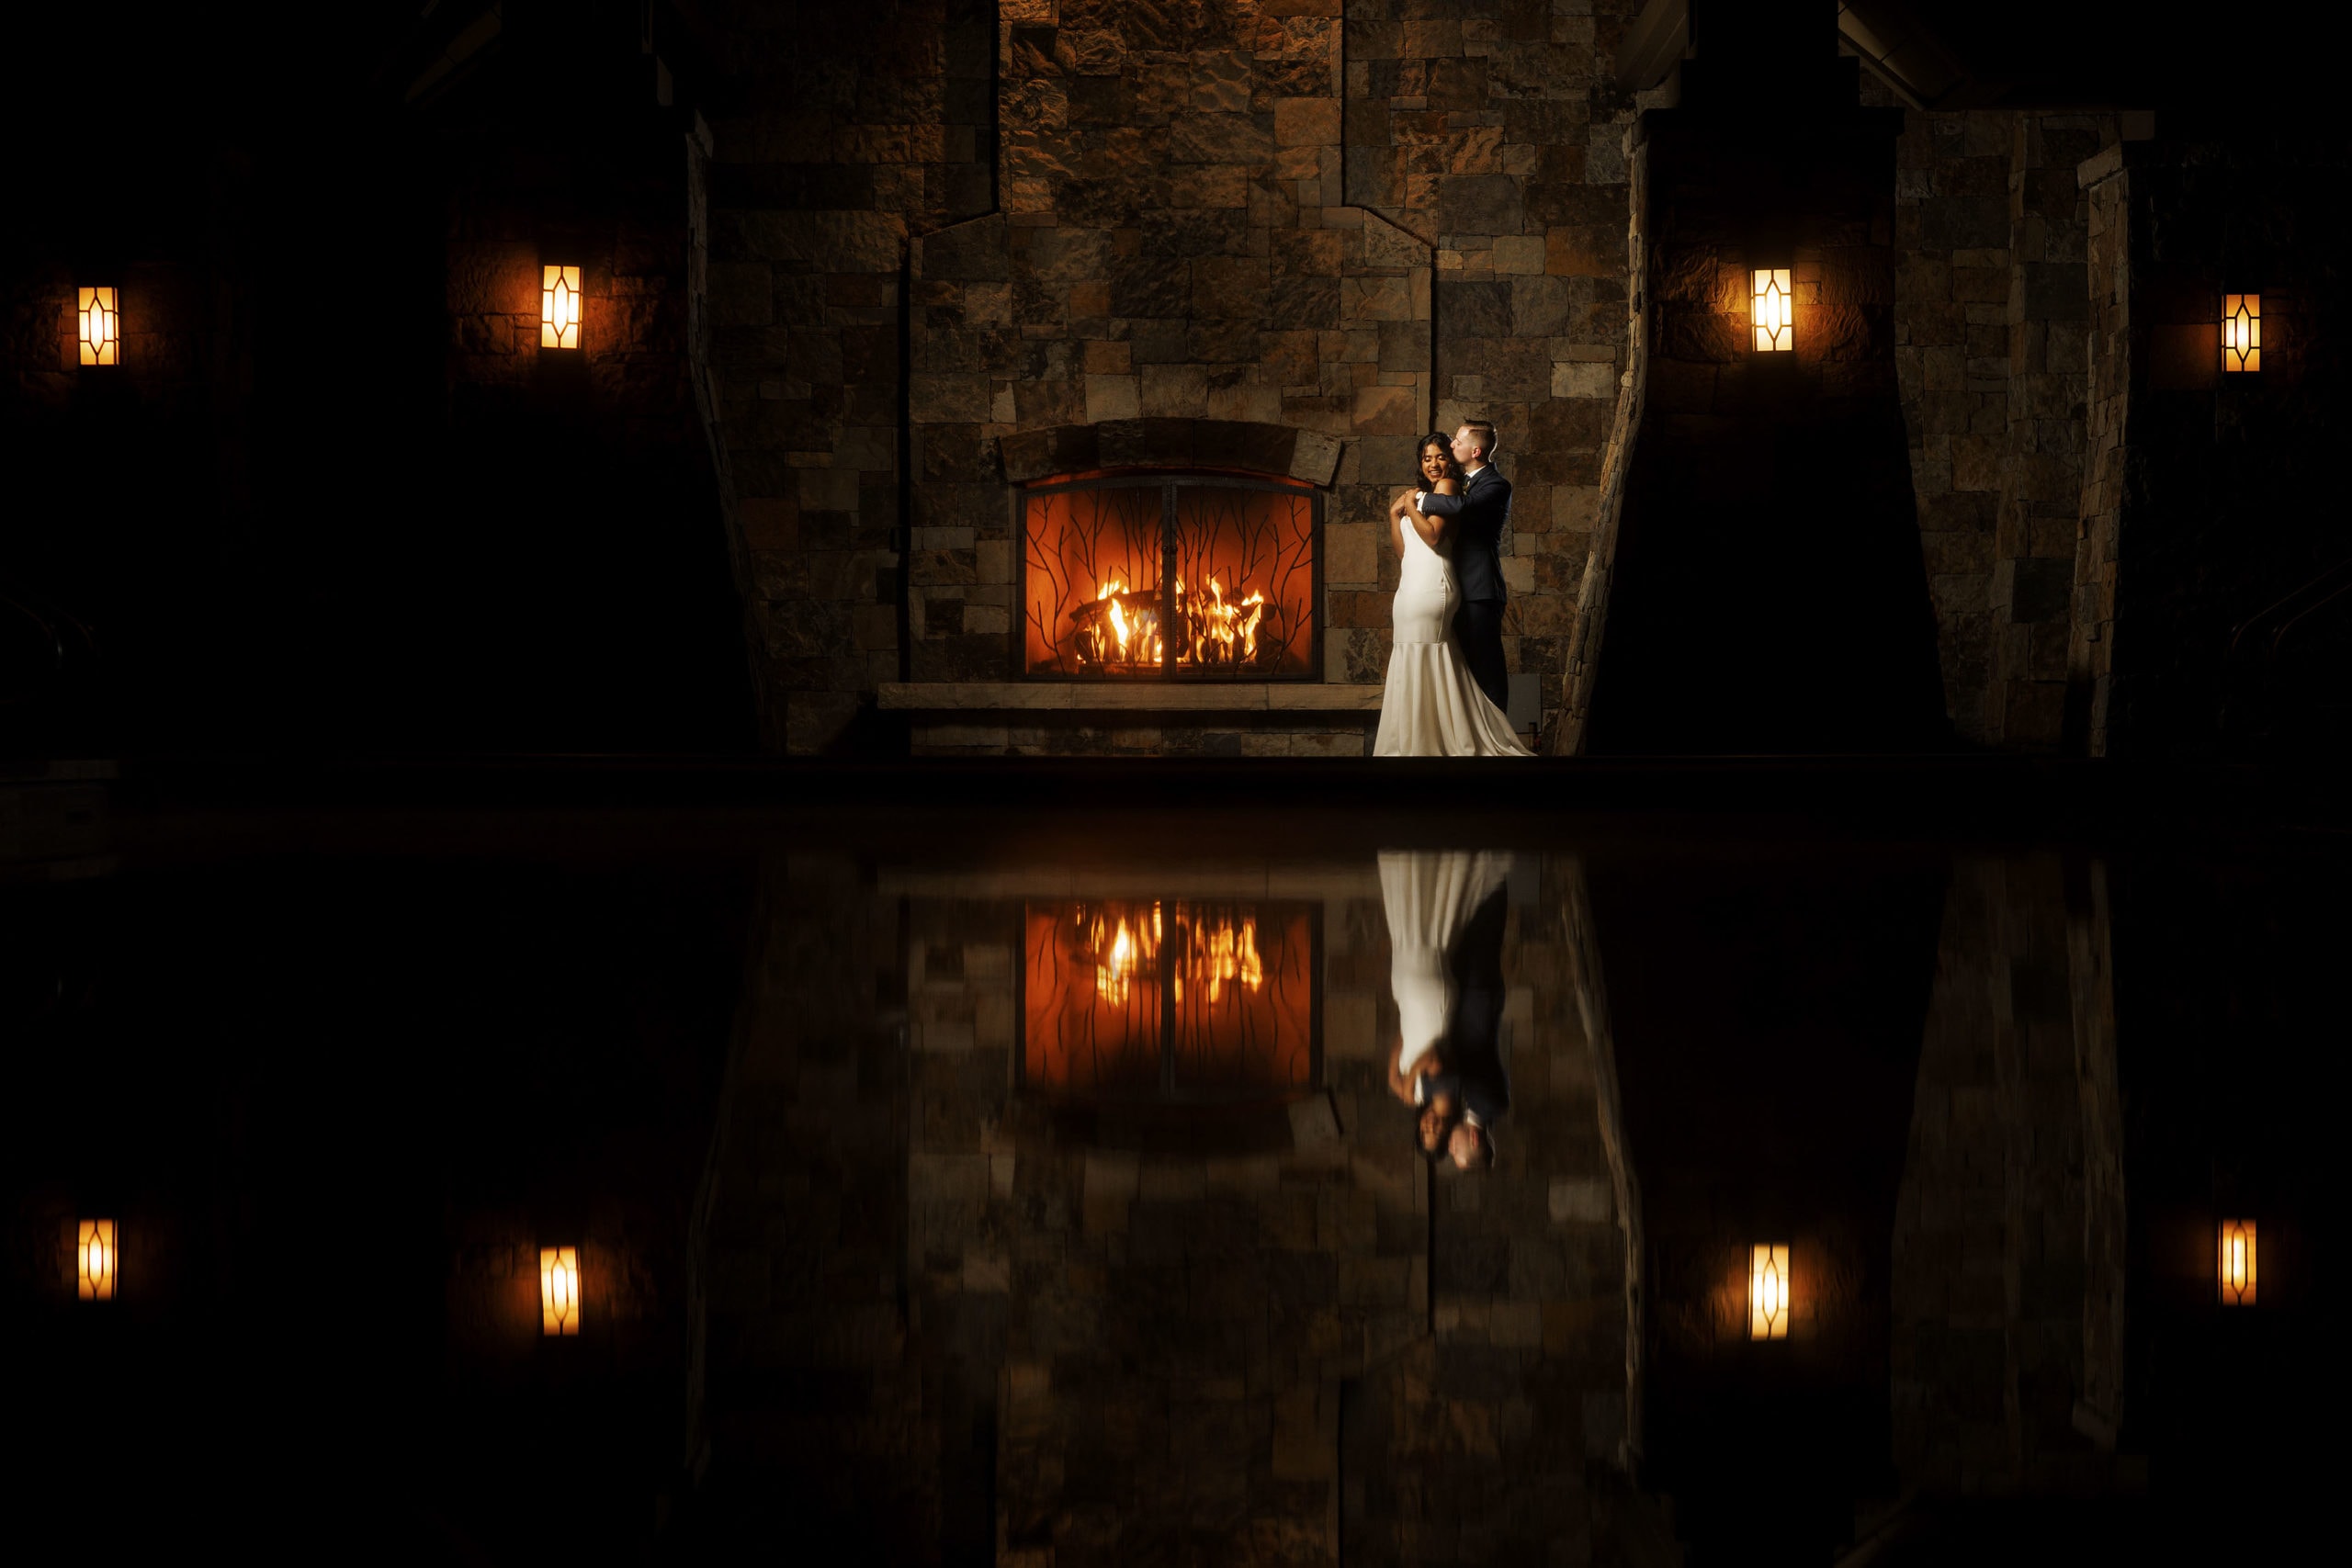 The bride and groom pose in front of the fireplace on their wedding day at Four Seasons Resort and Residences Vail